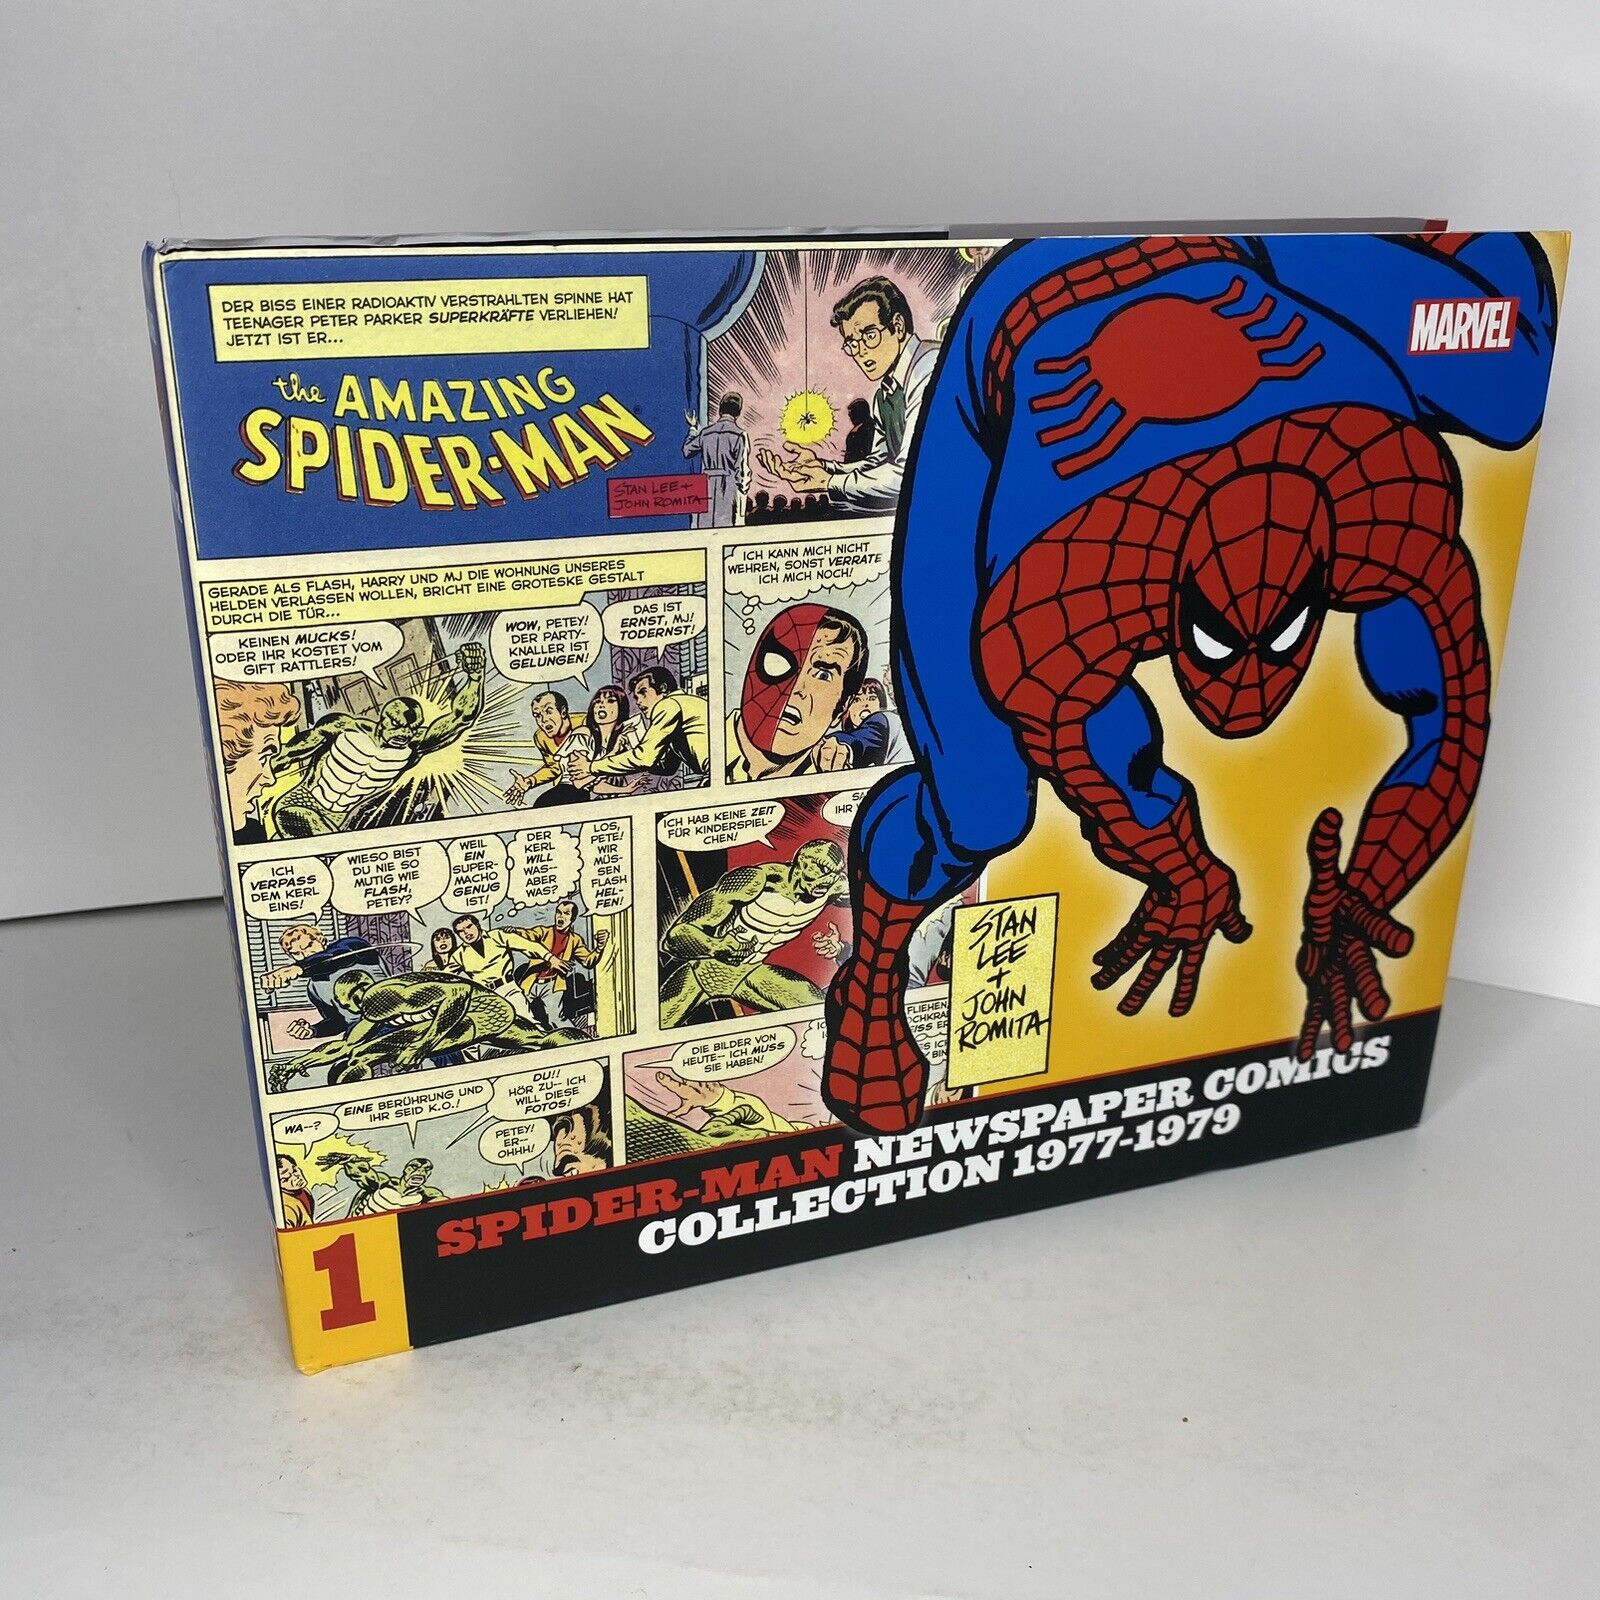 The Amazing Spider-Man Ultimate Newspaper Comics Collection 1977-1979 - German